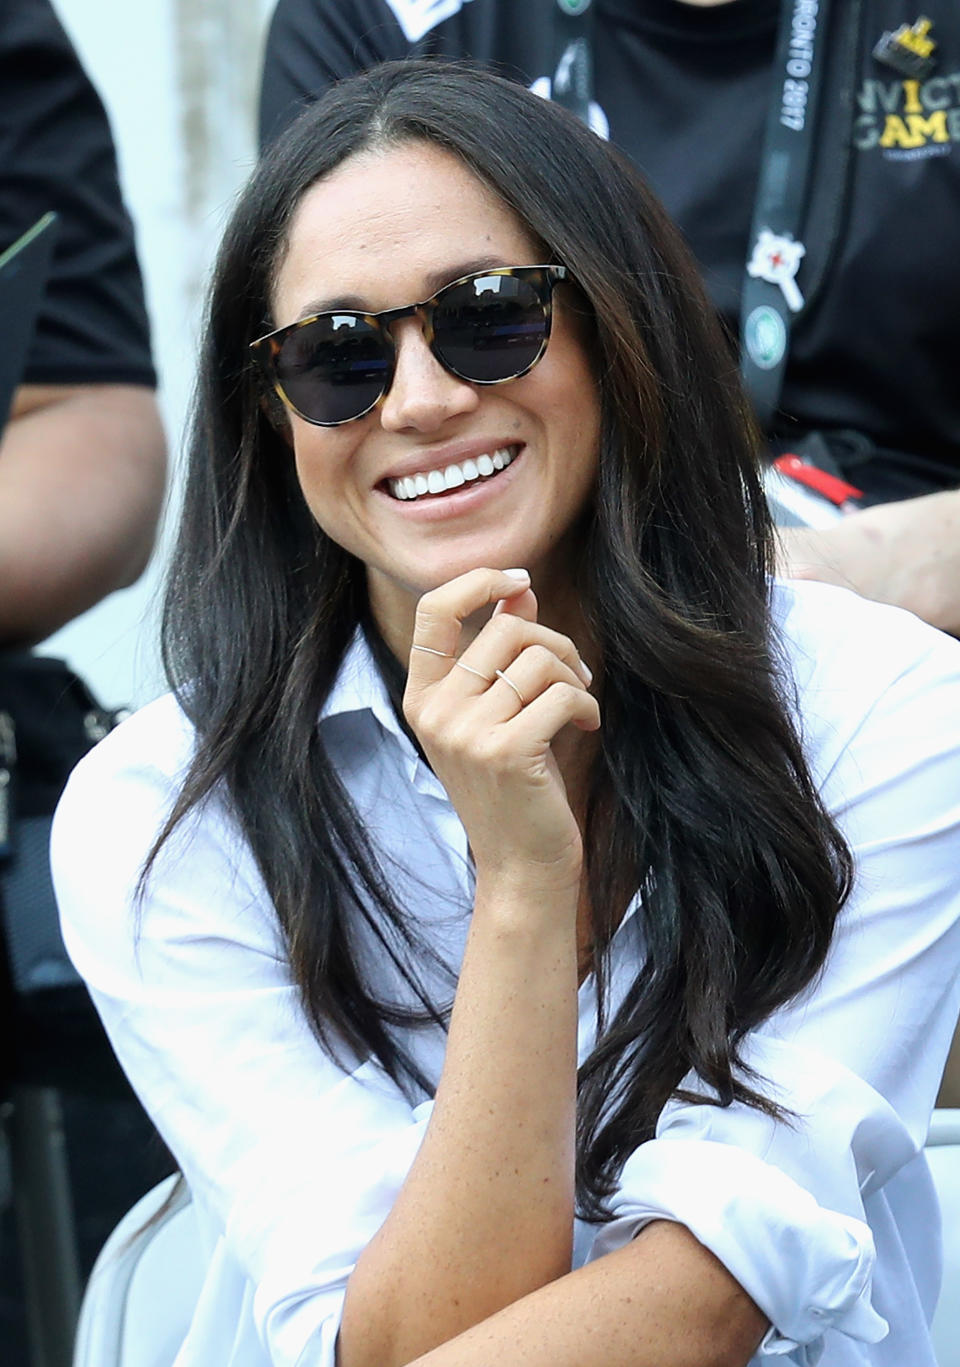 The designers of Meghan’s sunglasses have made over £20,000 from that pair alone [Photo: Getty]